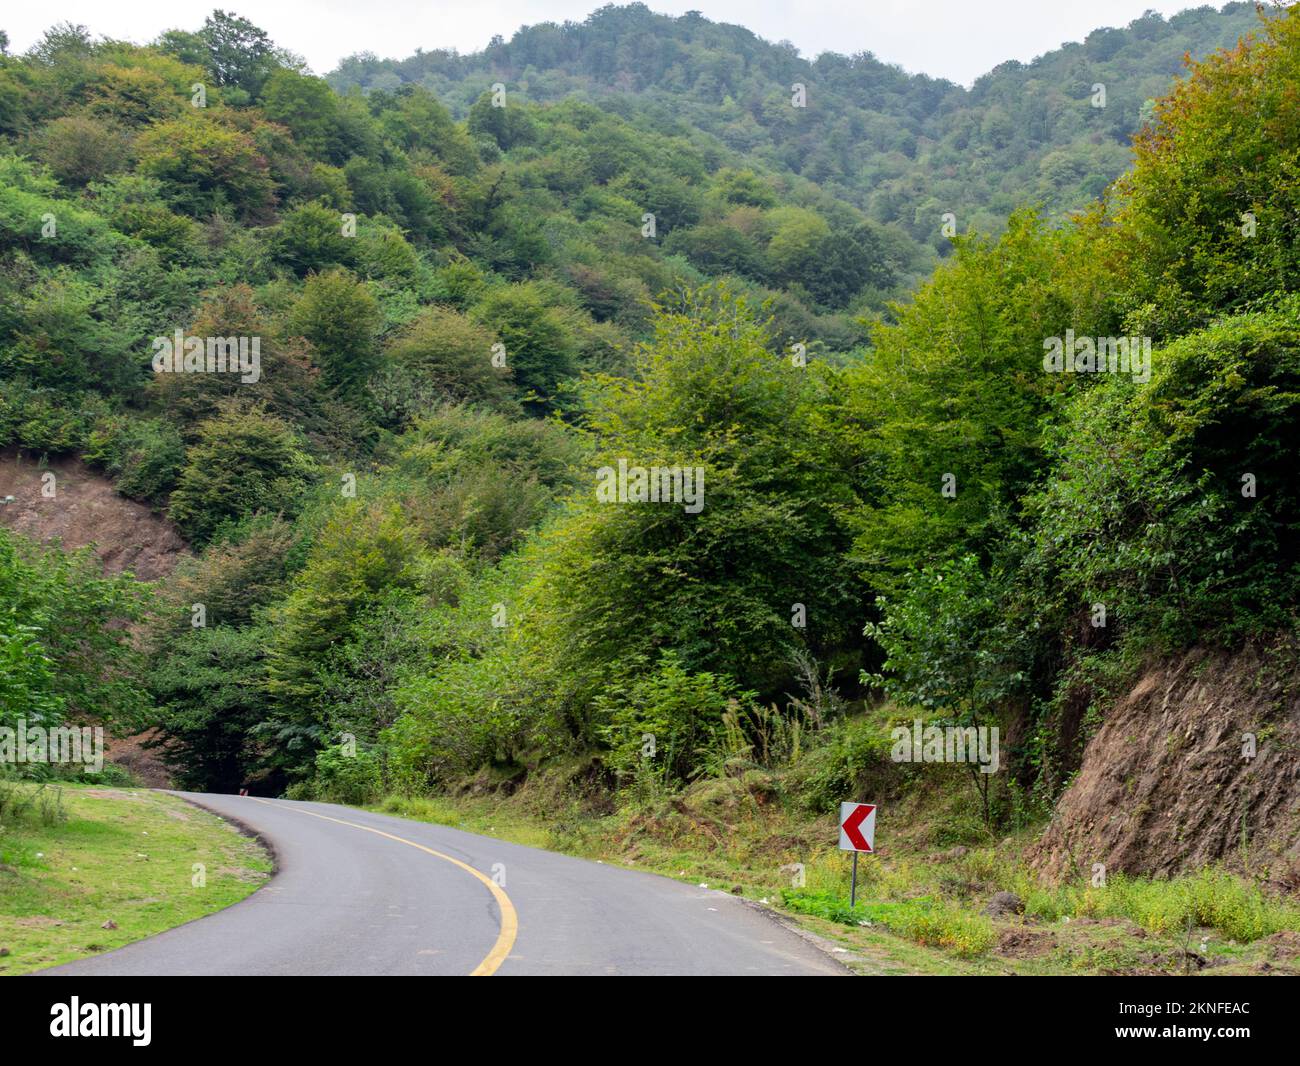 A road in the wooded mountains Stock Photo